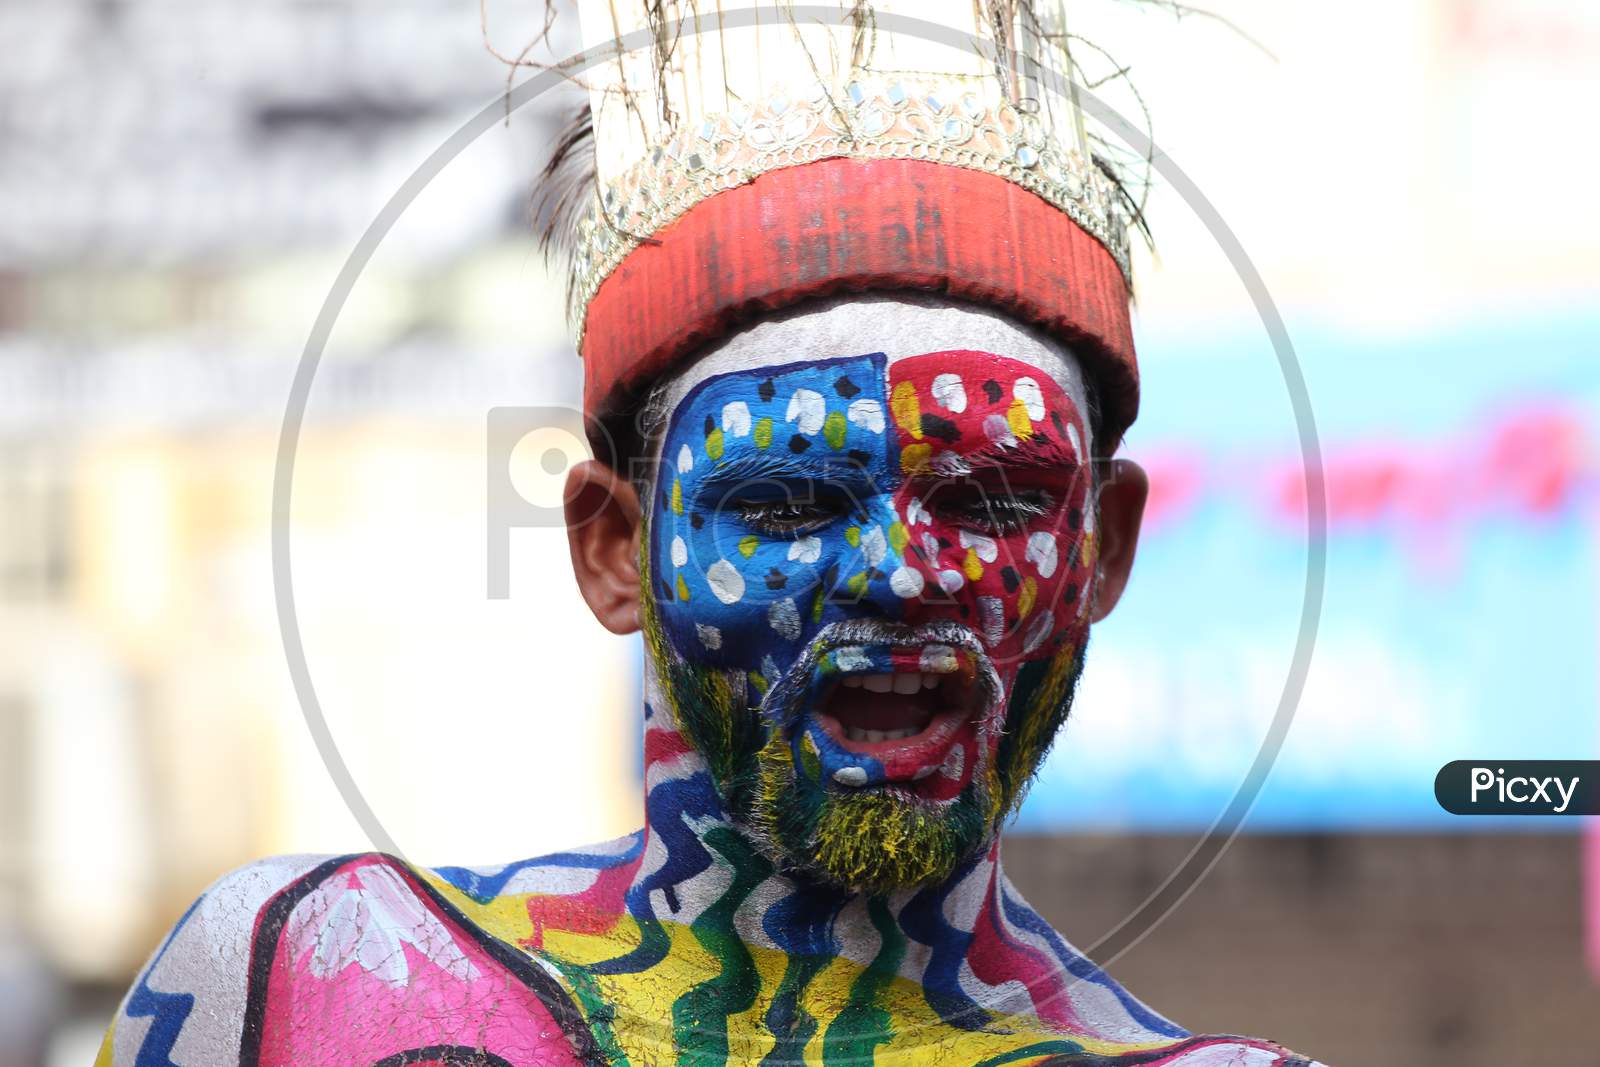 Local tribal People With Facial Paint In Gangaur Festival Udaipur On 4 April 2019.